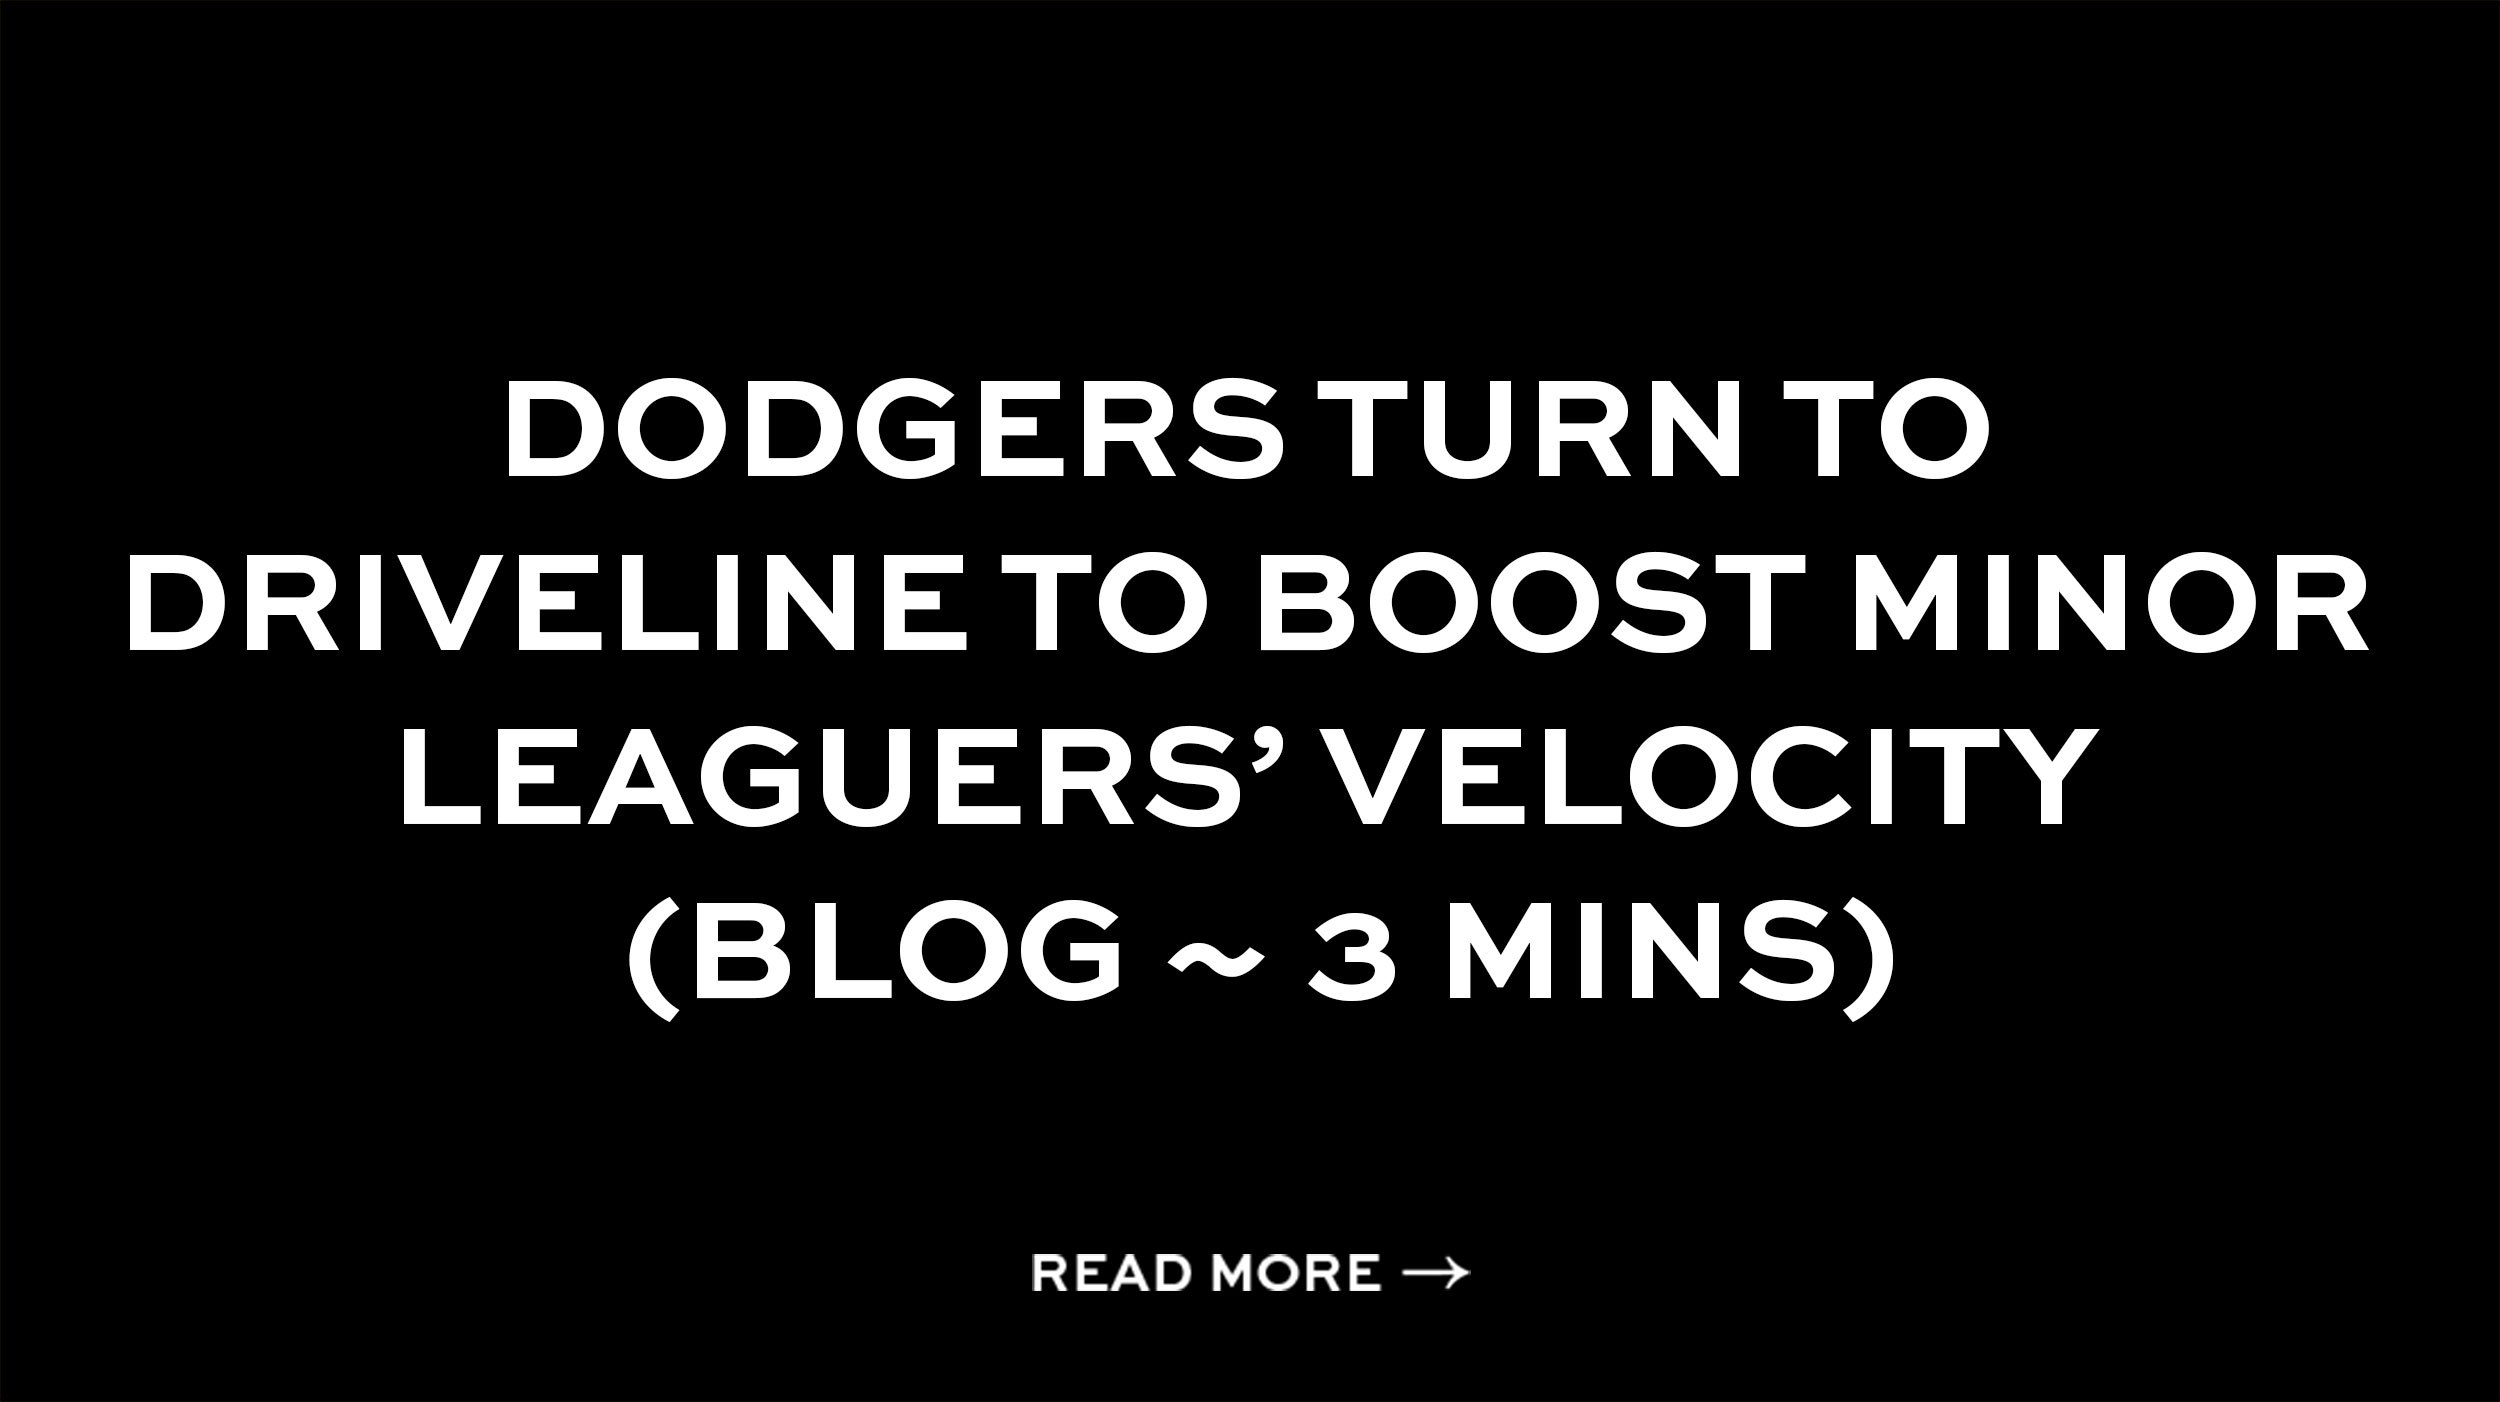 Dodgers turn to Driveline to boost minor leaguers’ velocity (Blog ~ 3 mins)